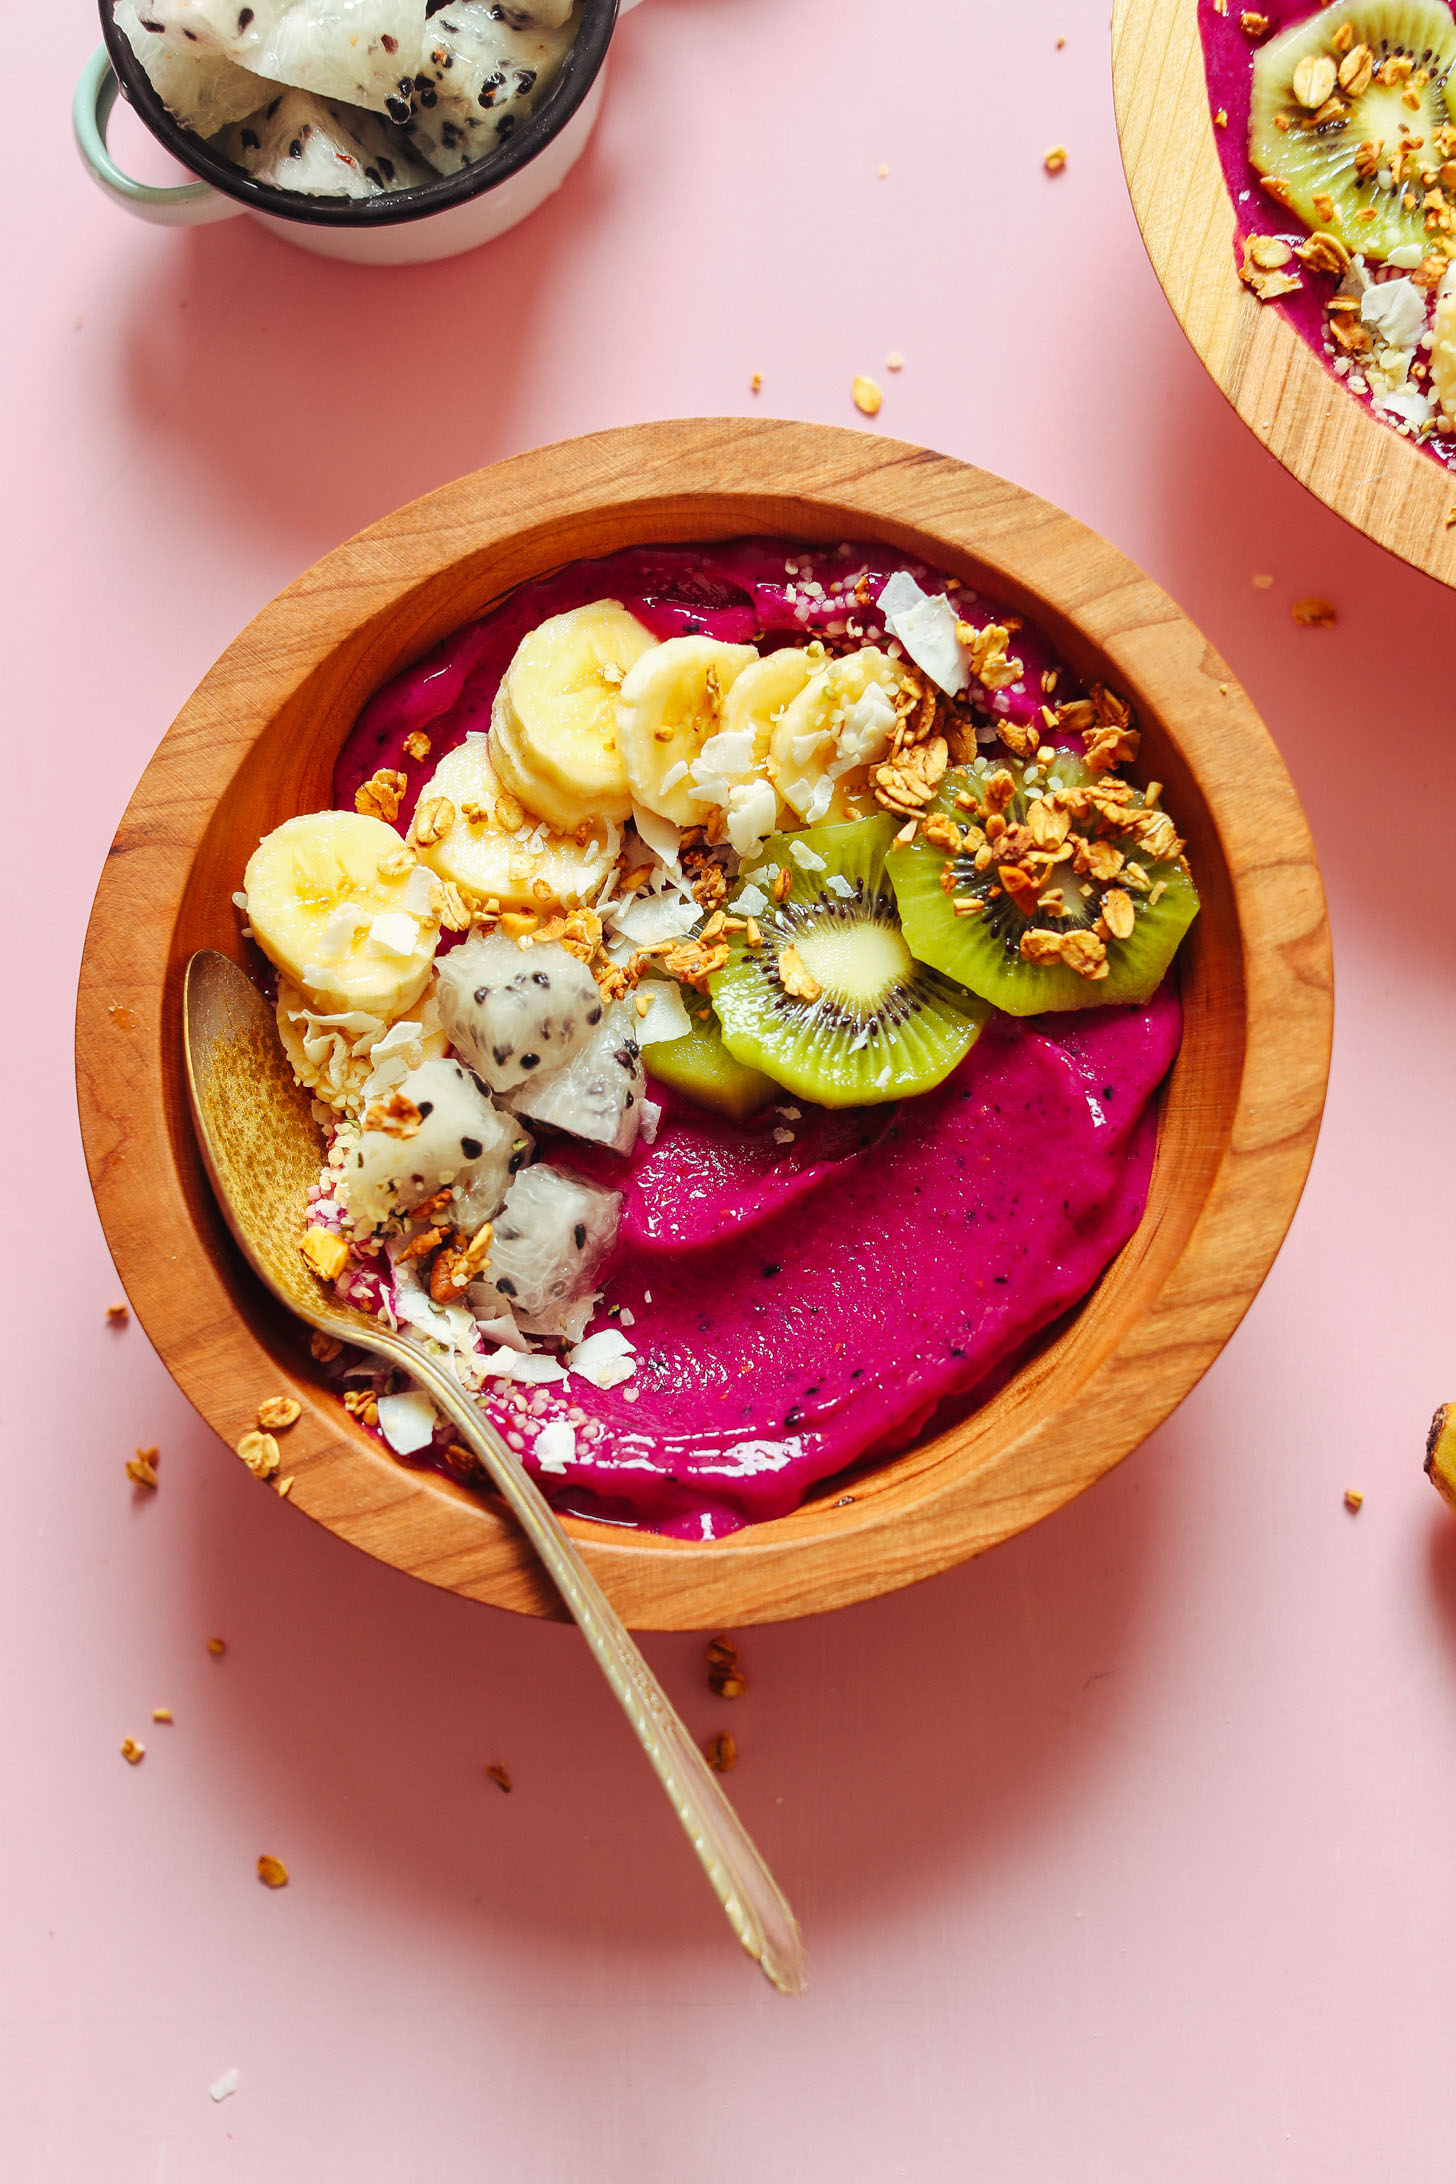 A Dragon Fruit Smoothie Bowl for the perfect gluten-free vegan breakfast treat